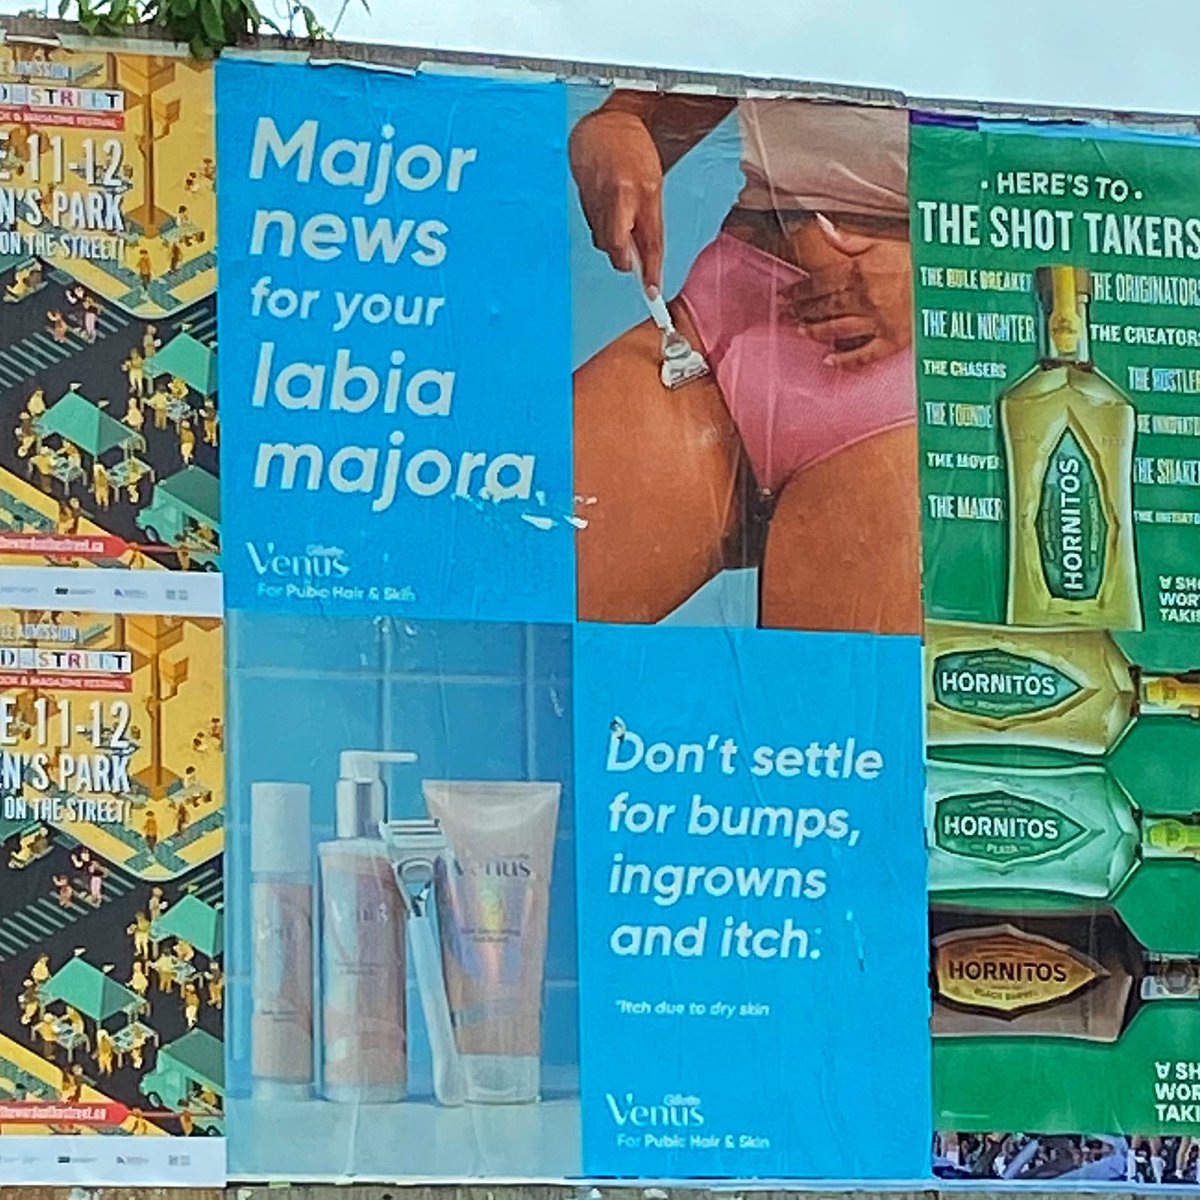 Thank God this isn’t by @CNN, because they’d be BREAKING your labia majora.

@GilletteVenus #GilletteVenus #shaving #PersonalCareProducts #advertising @terryoinfluence